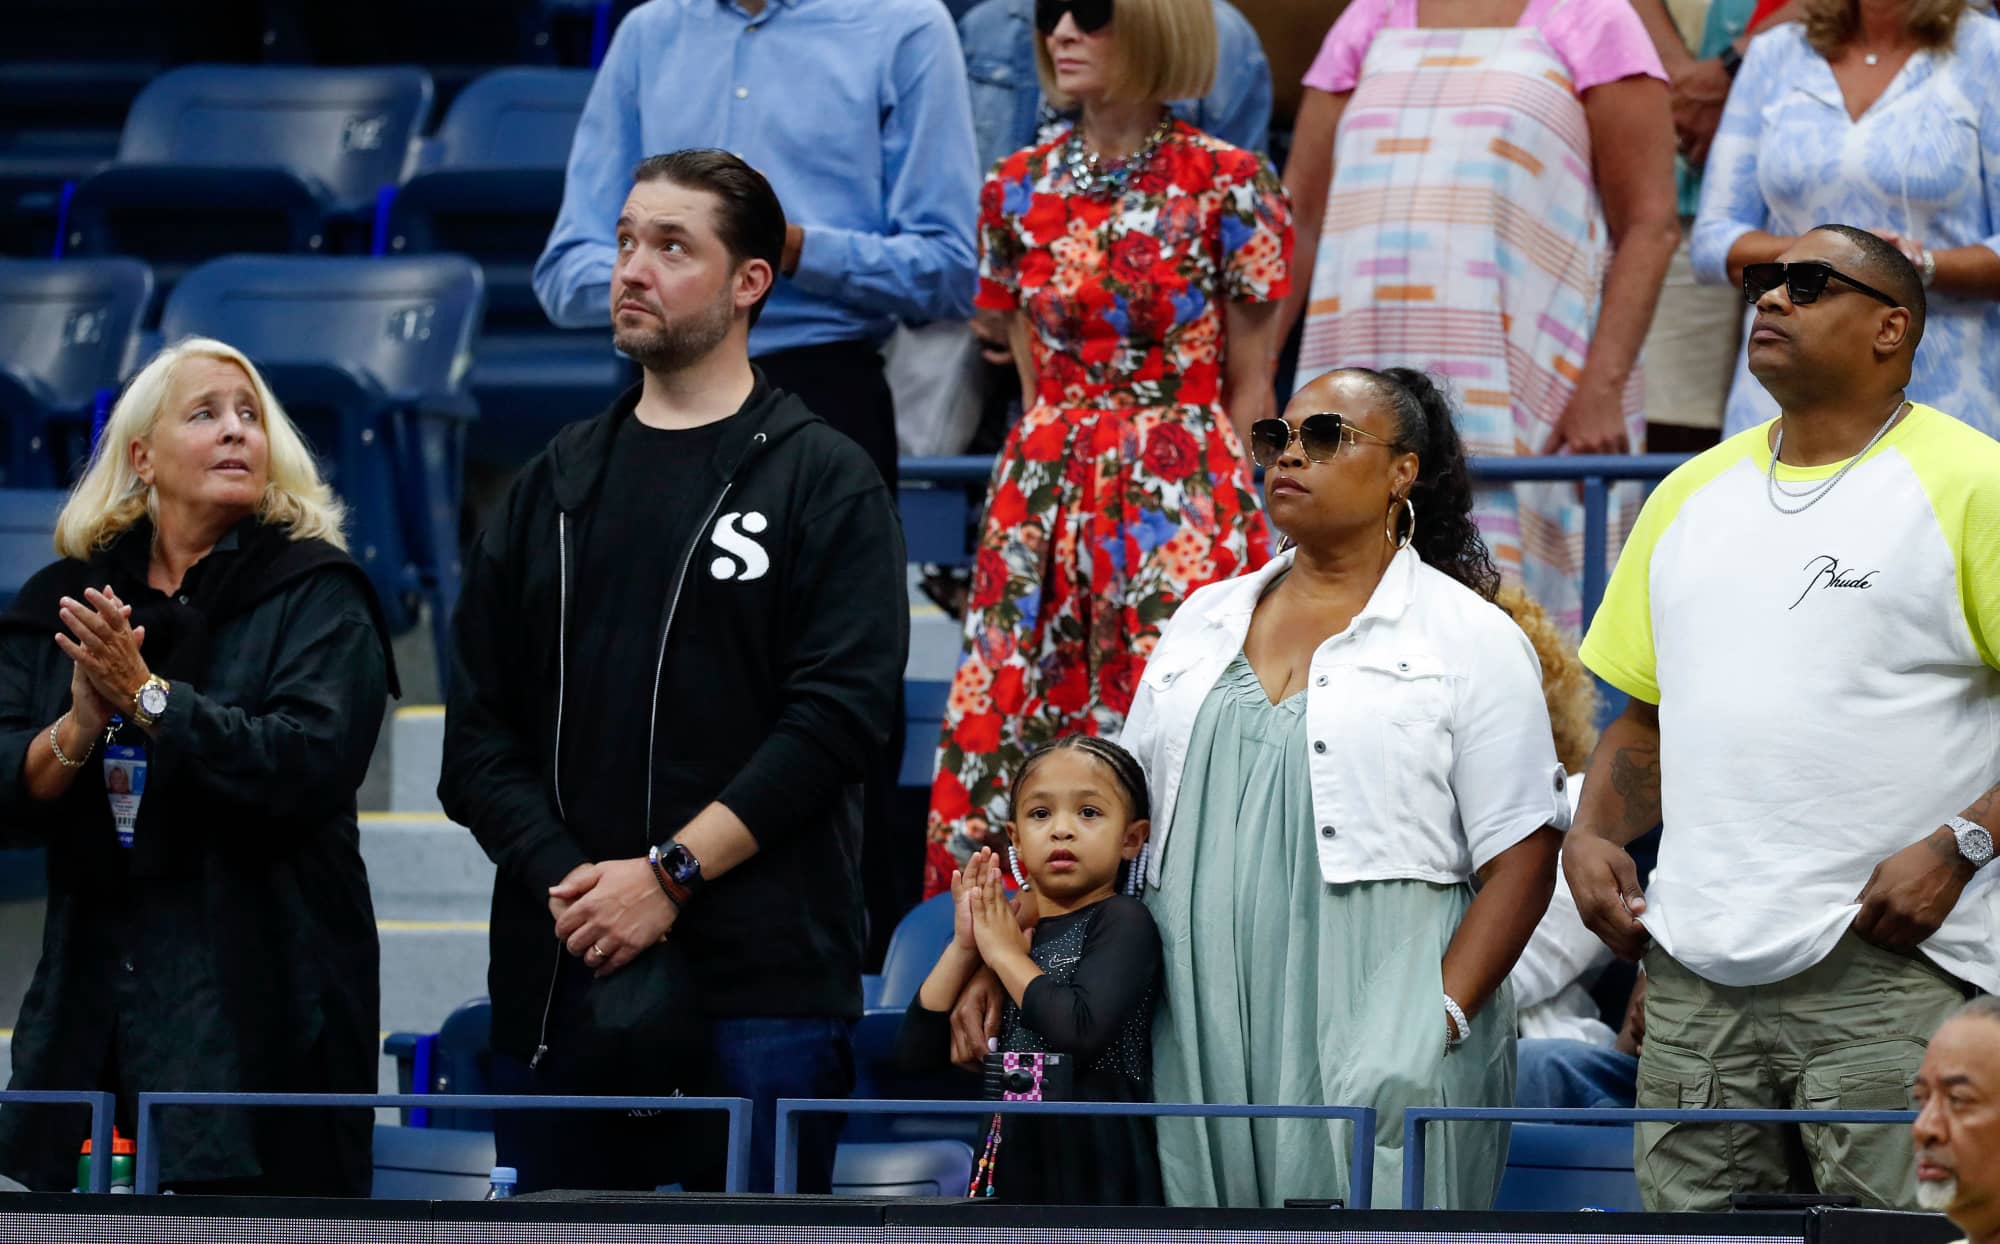 Serena Williams' daughter Alexis Olympia and husband Alexis Ohanian